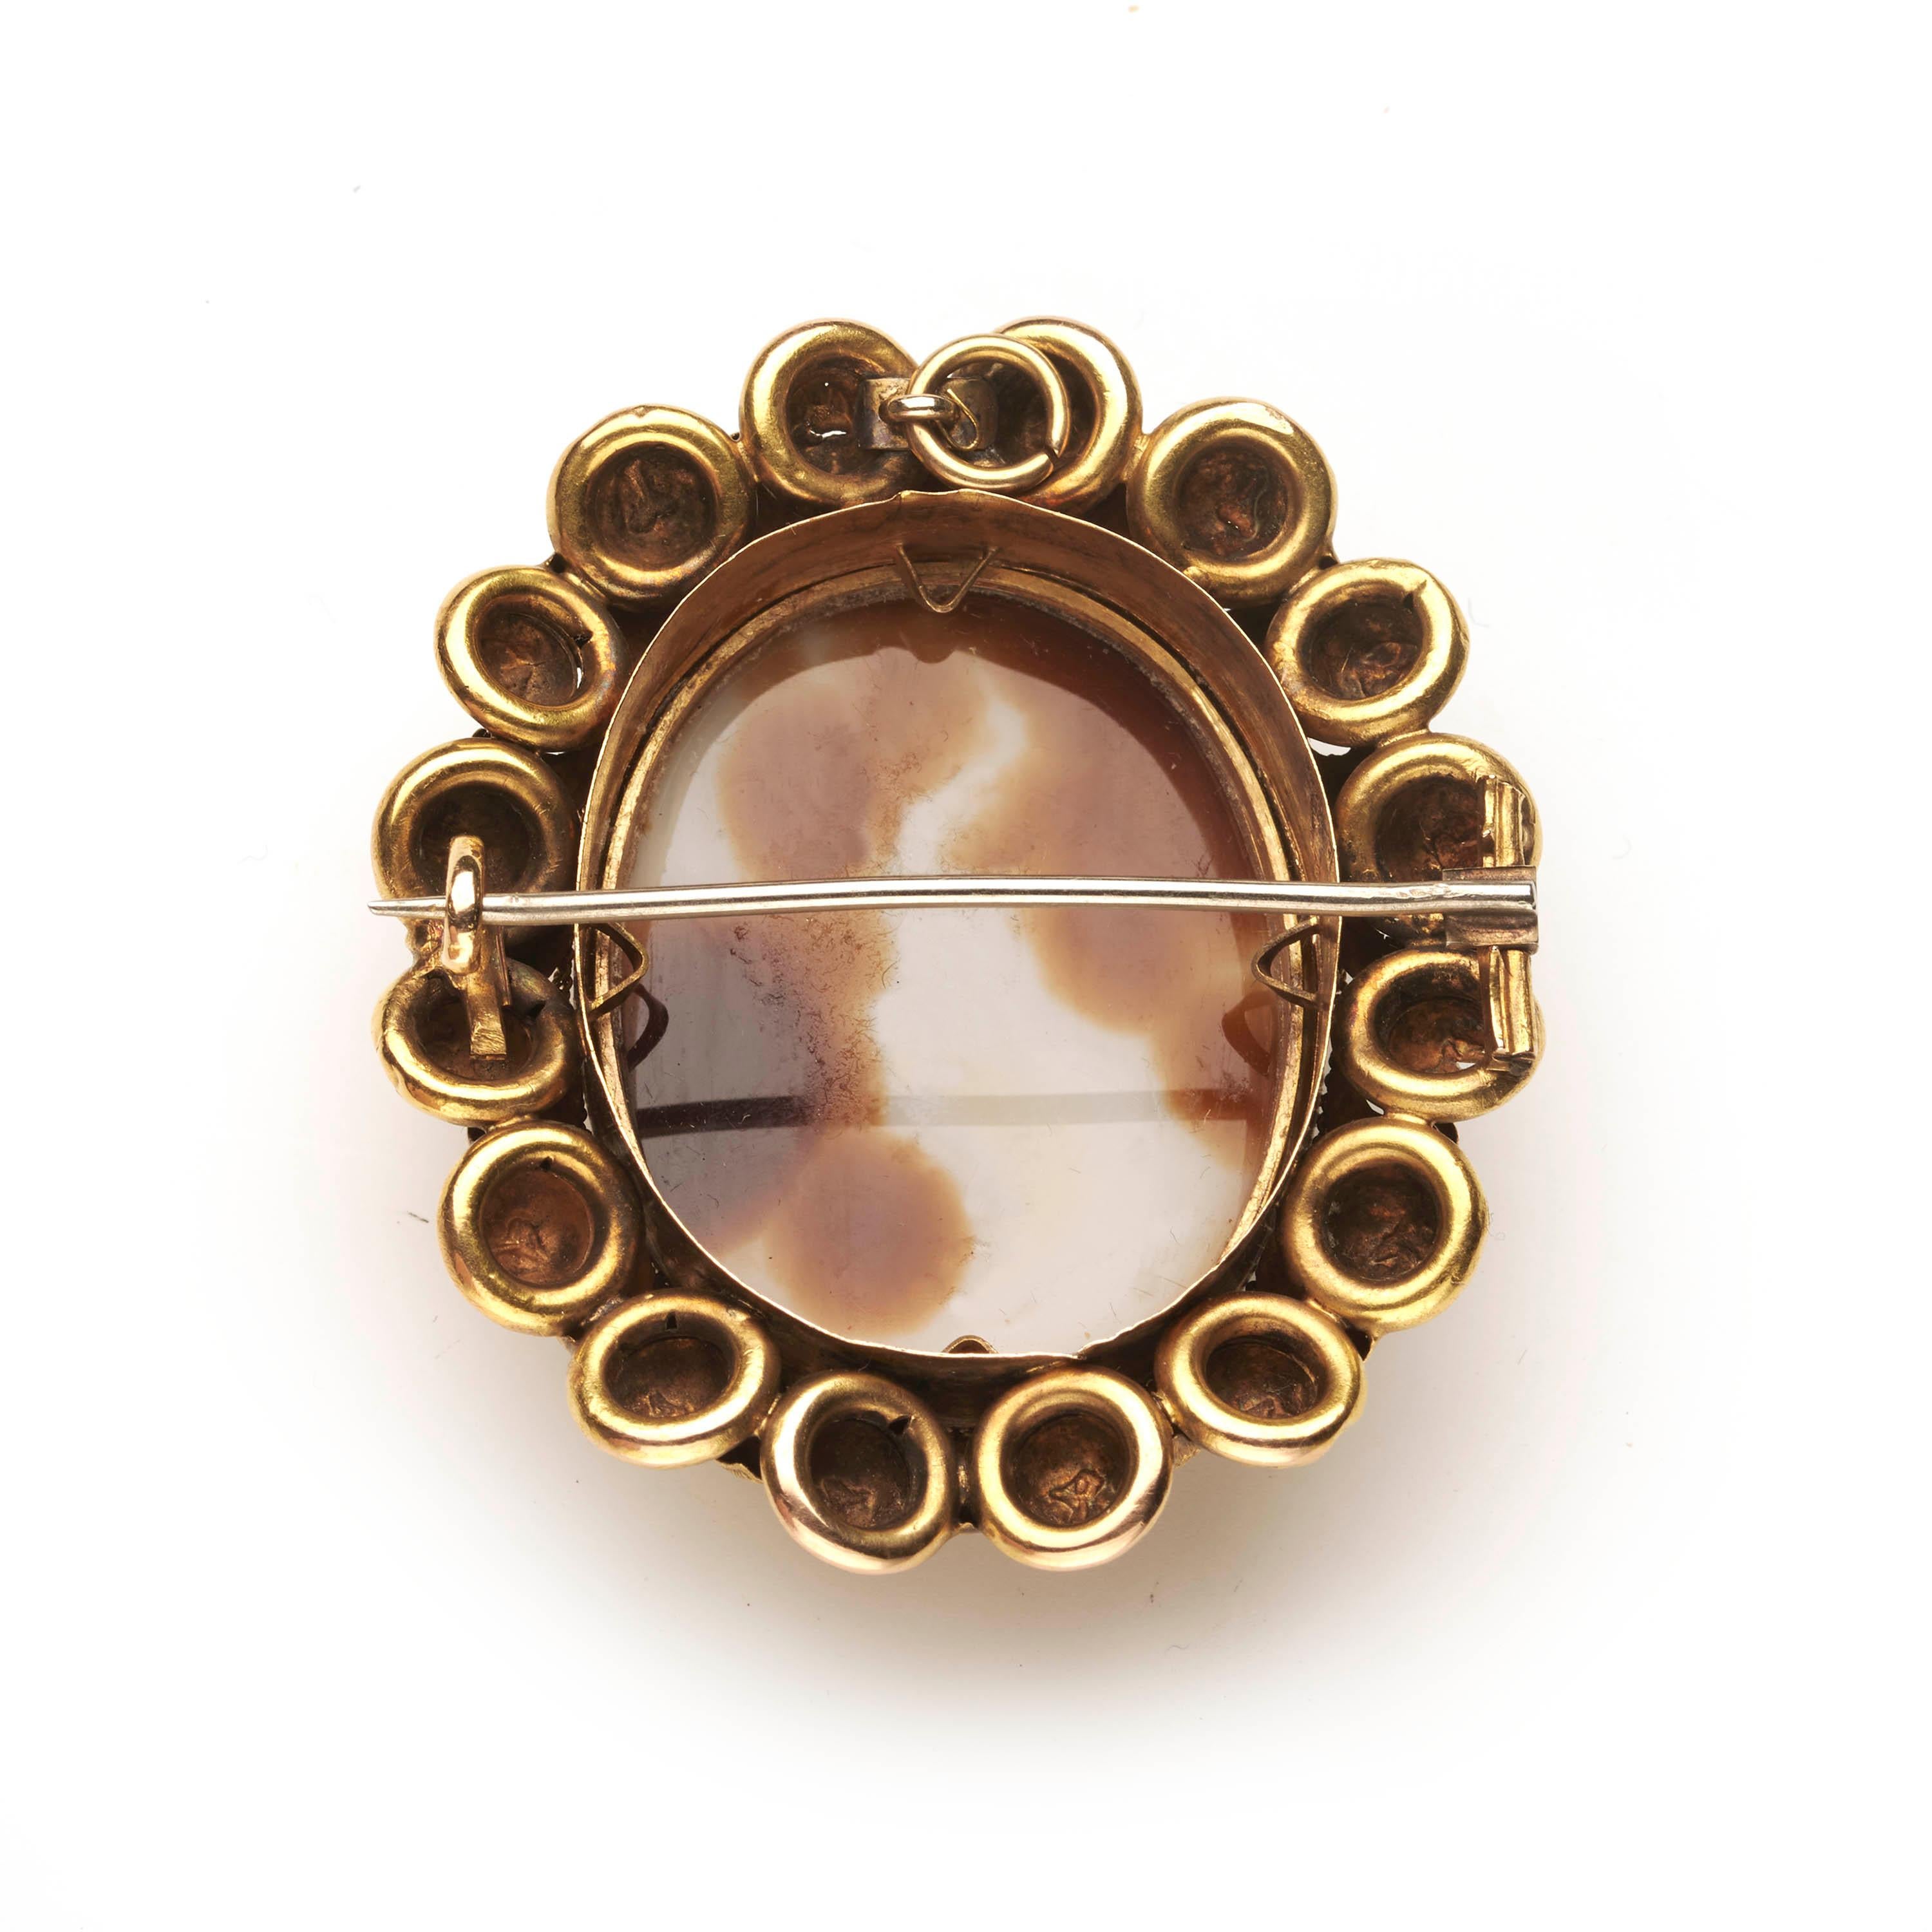 An antique cameo brooch, with a hardstone sardonyx cameo of a lady, with a Roman hairstyle, on a brown background, in a double row gold frame, with a rub over setting, a twisted chain and engraved, stamped foliate surround. There is a loop at the